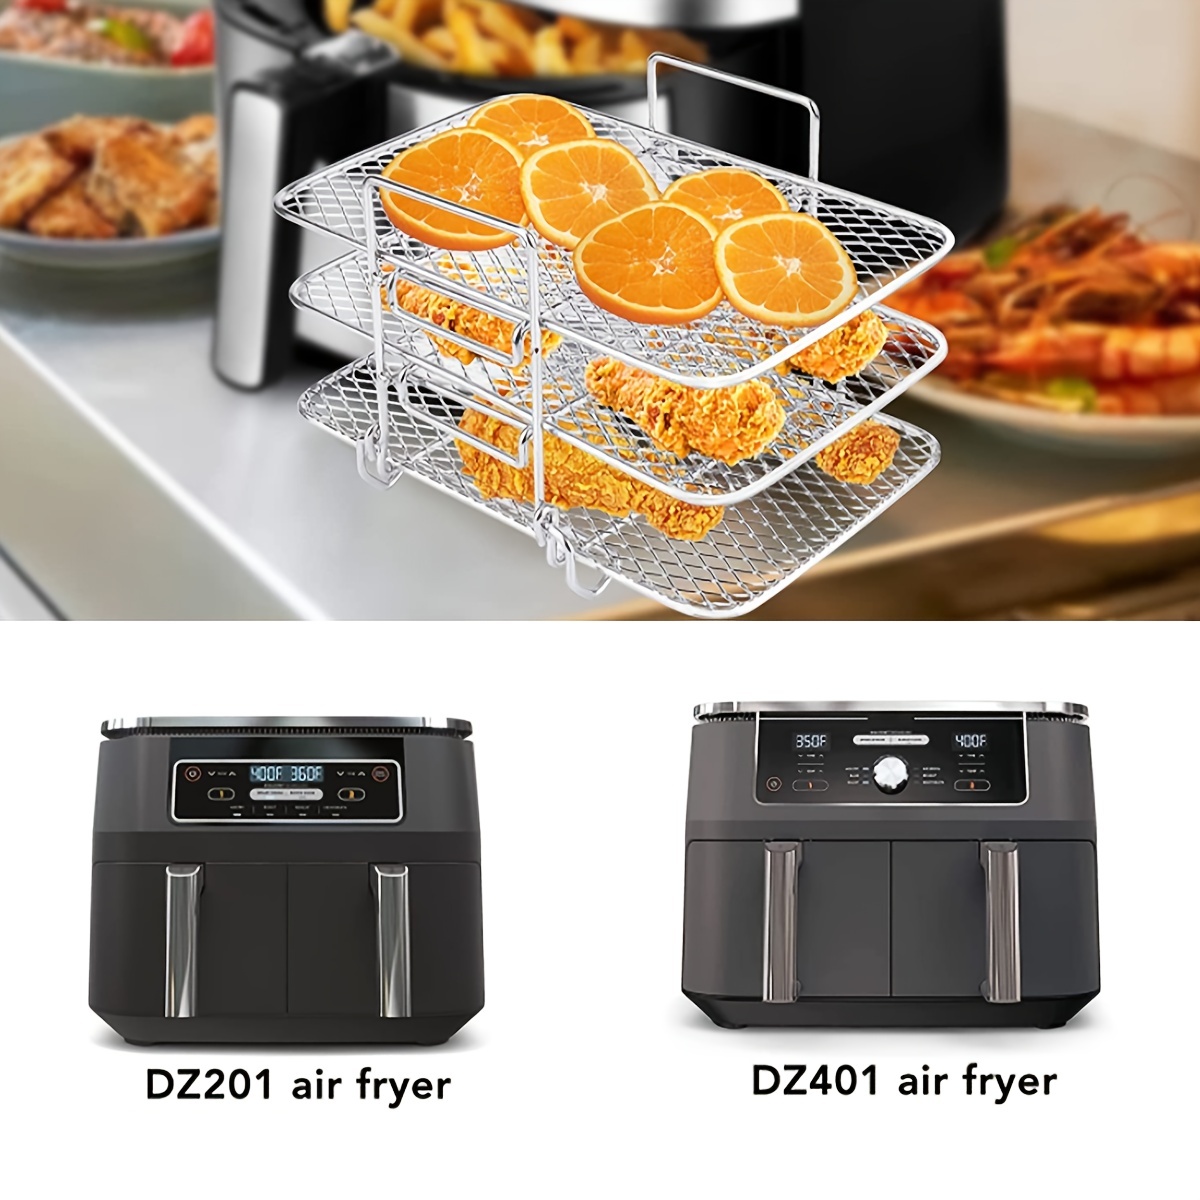 Air Fryer Rack For Dual Air Fryers, Airfryer Basket Tray, Air Fryer  Accessories, Dehydrator Racks Fit All Double Basket Air Fryer Cooling  Drying